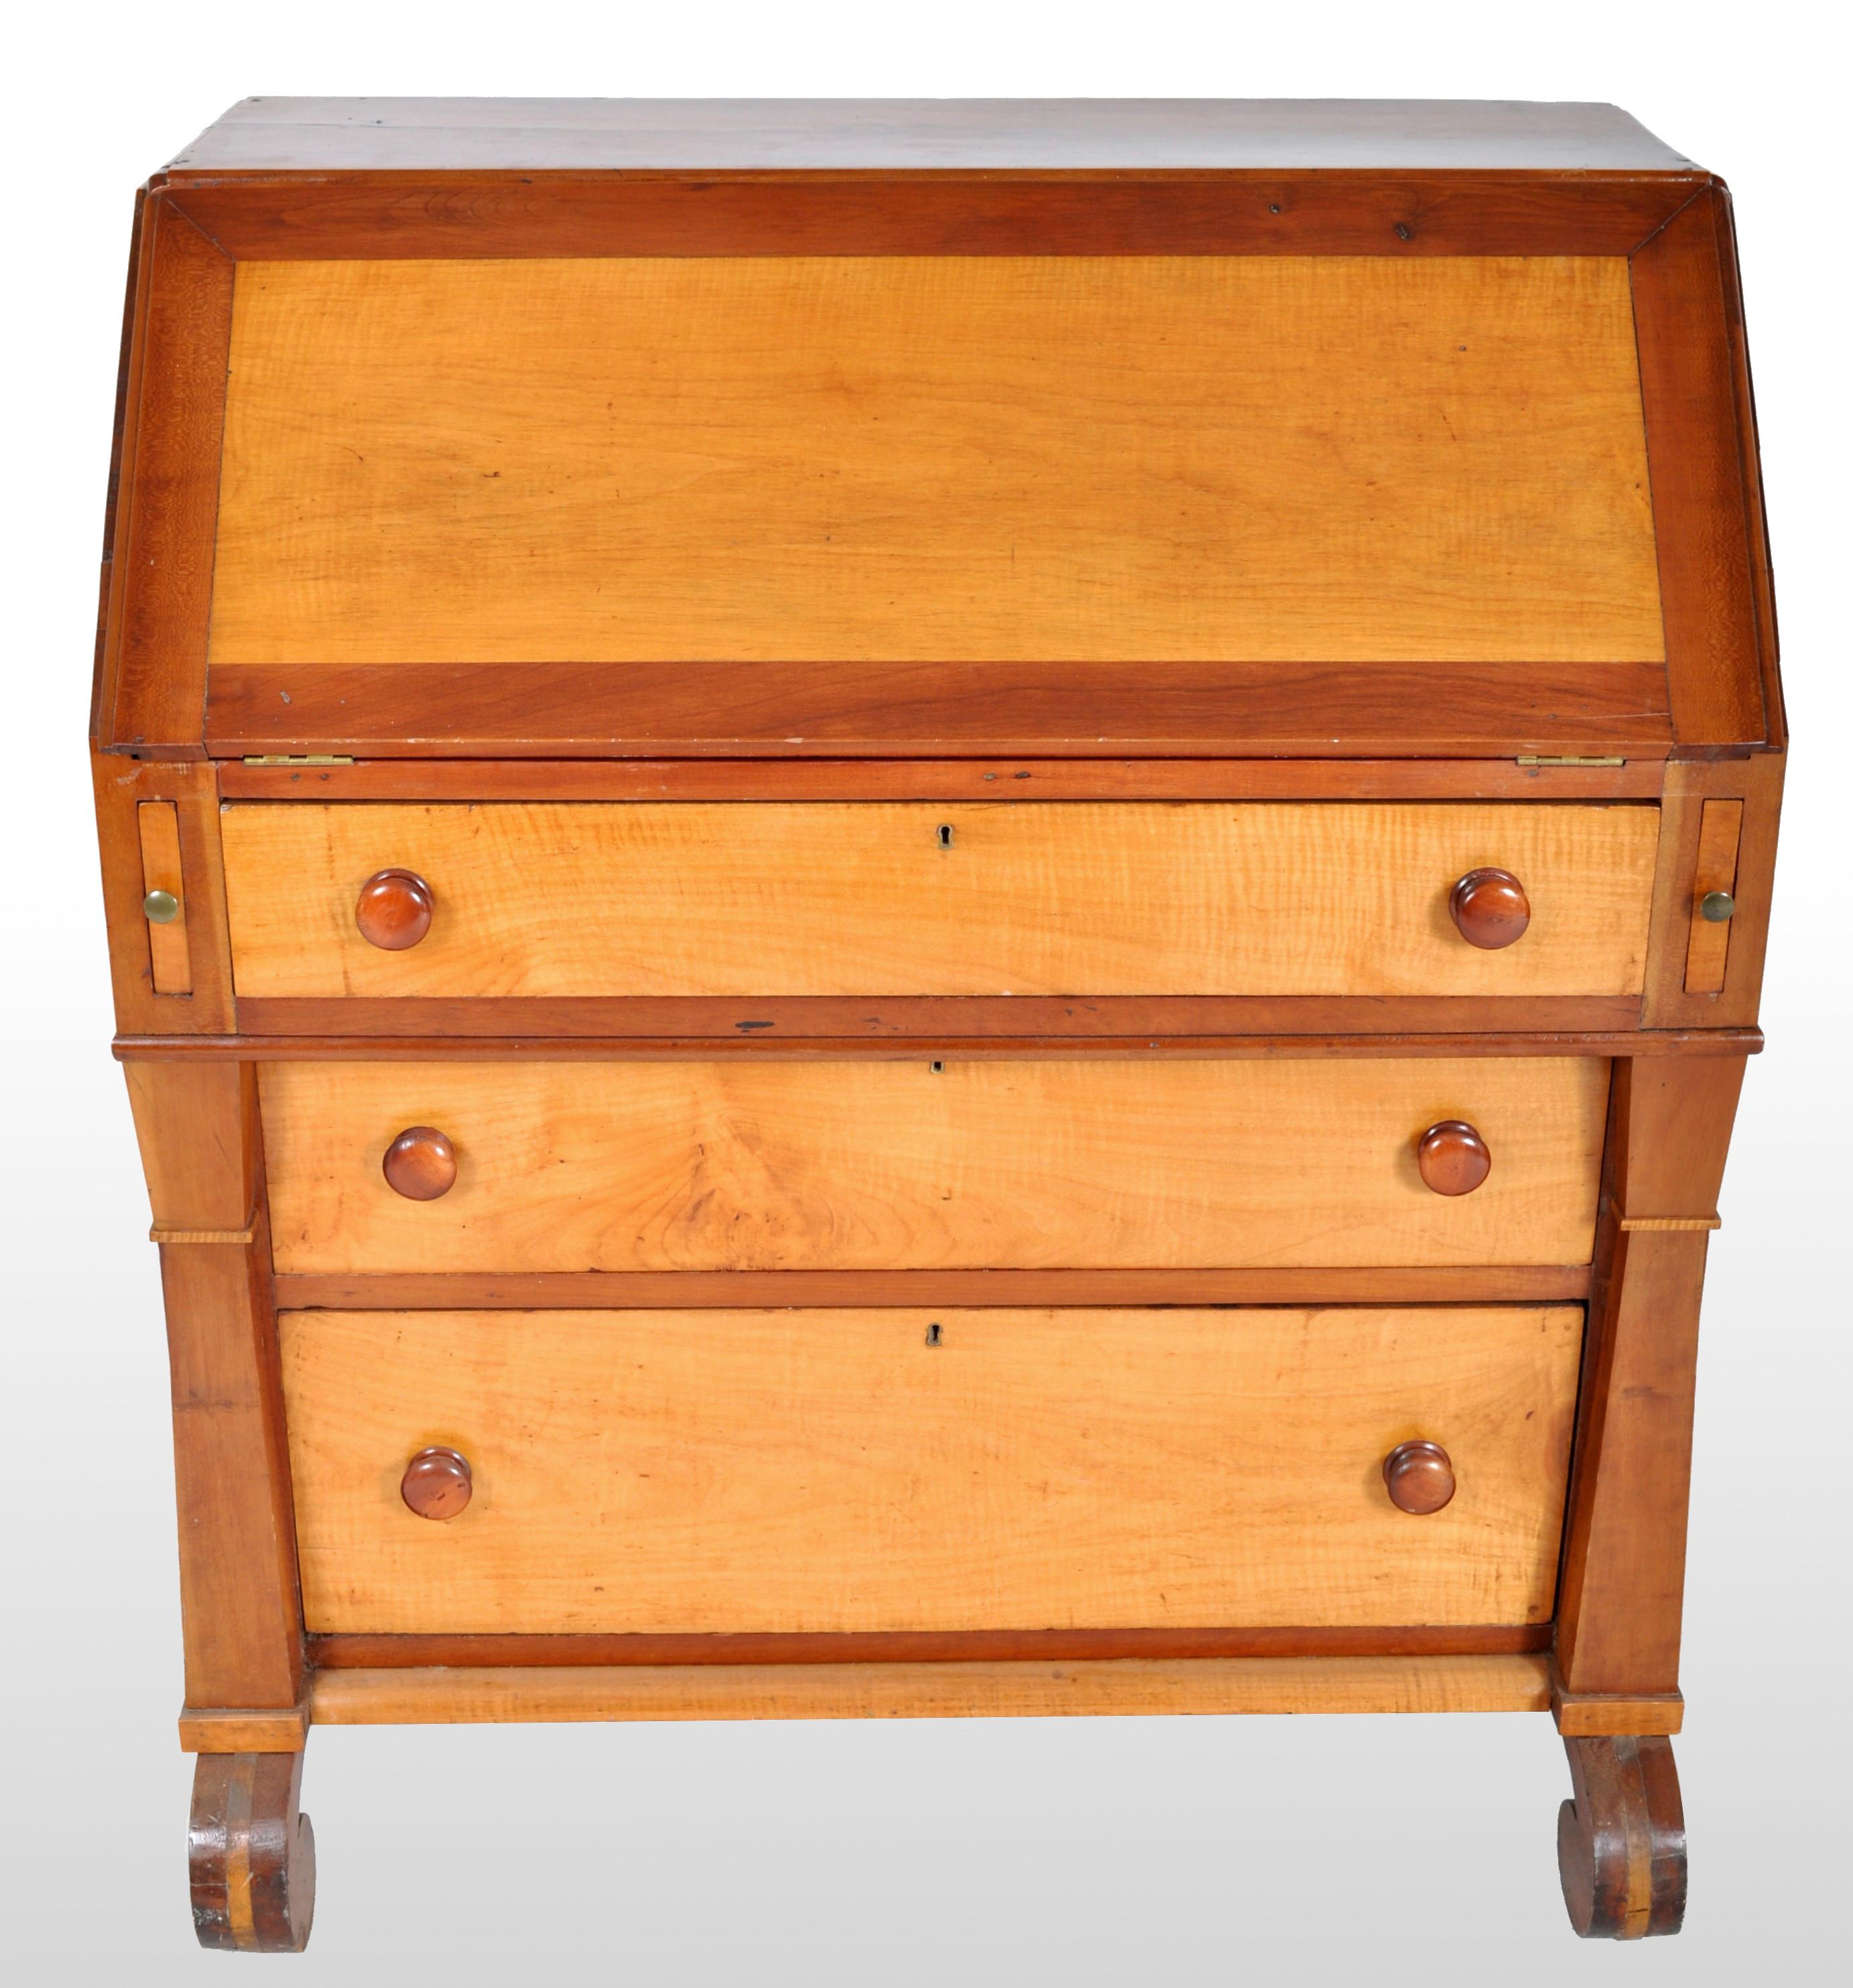 Antique American pre-civil war maple bureau/desk, circa 1830. Made from curly maple, the fall-front enclosing a fitted interior with eight drawers seven pigeon holes. Below are three graduated drawers and standing on scrolled feet.